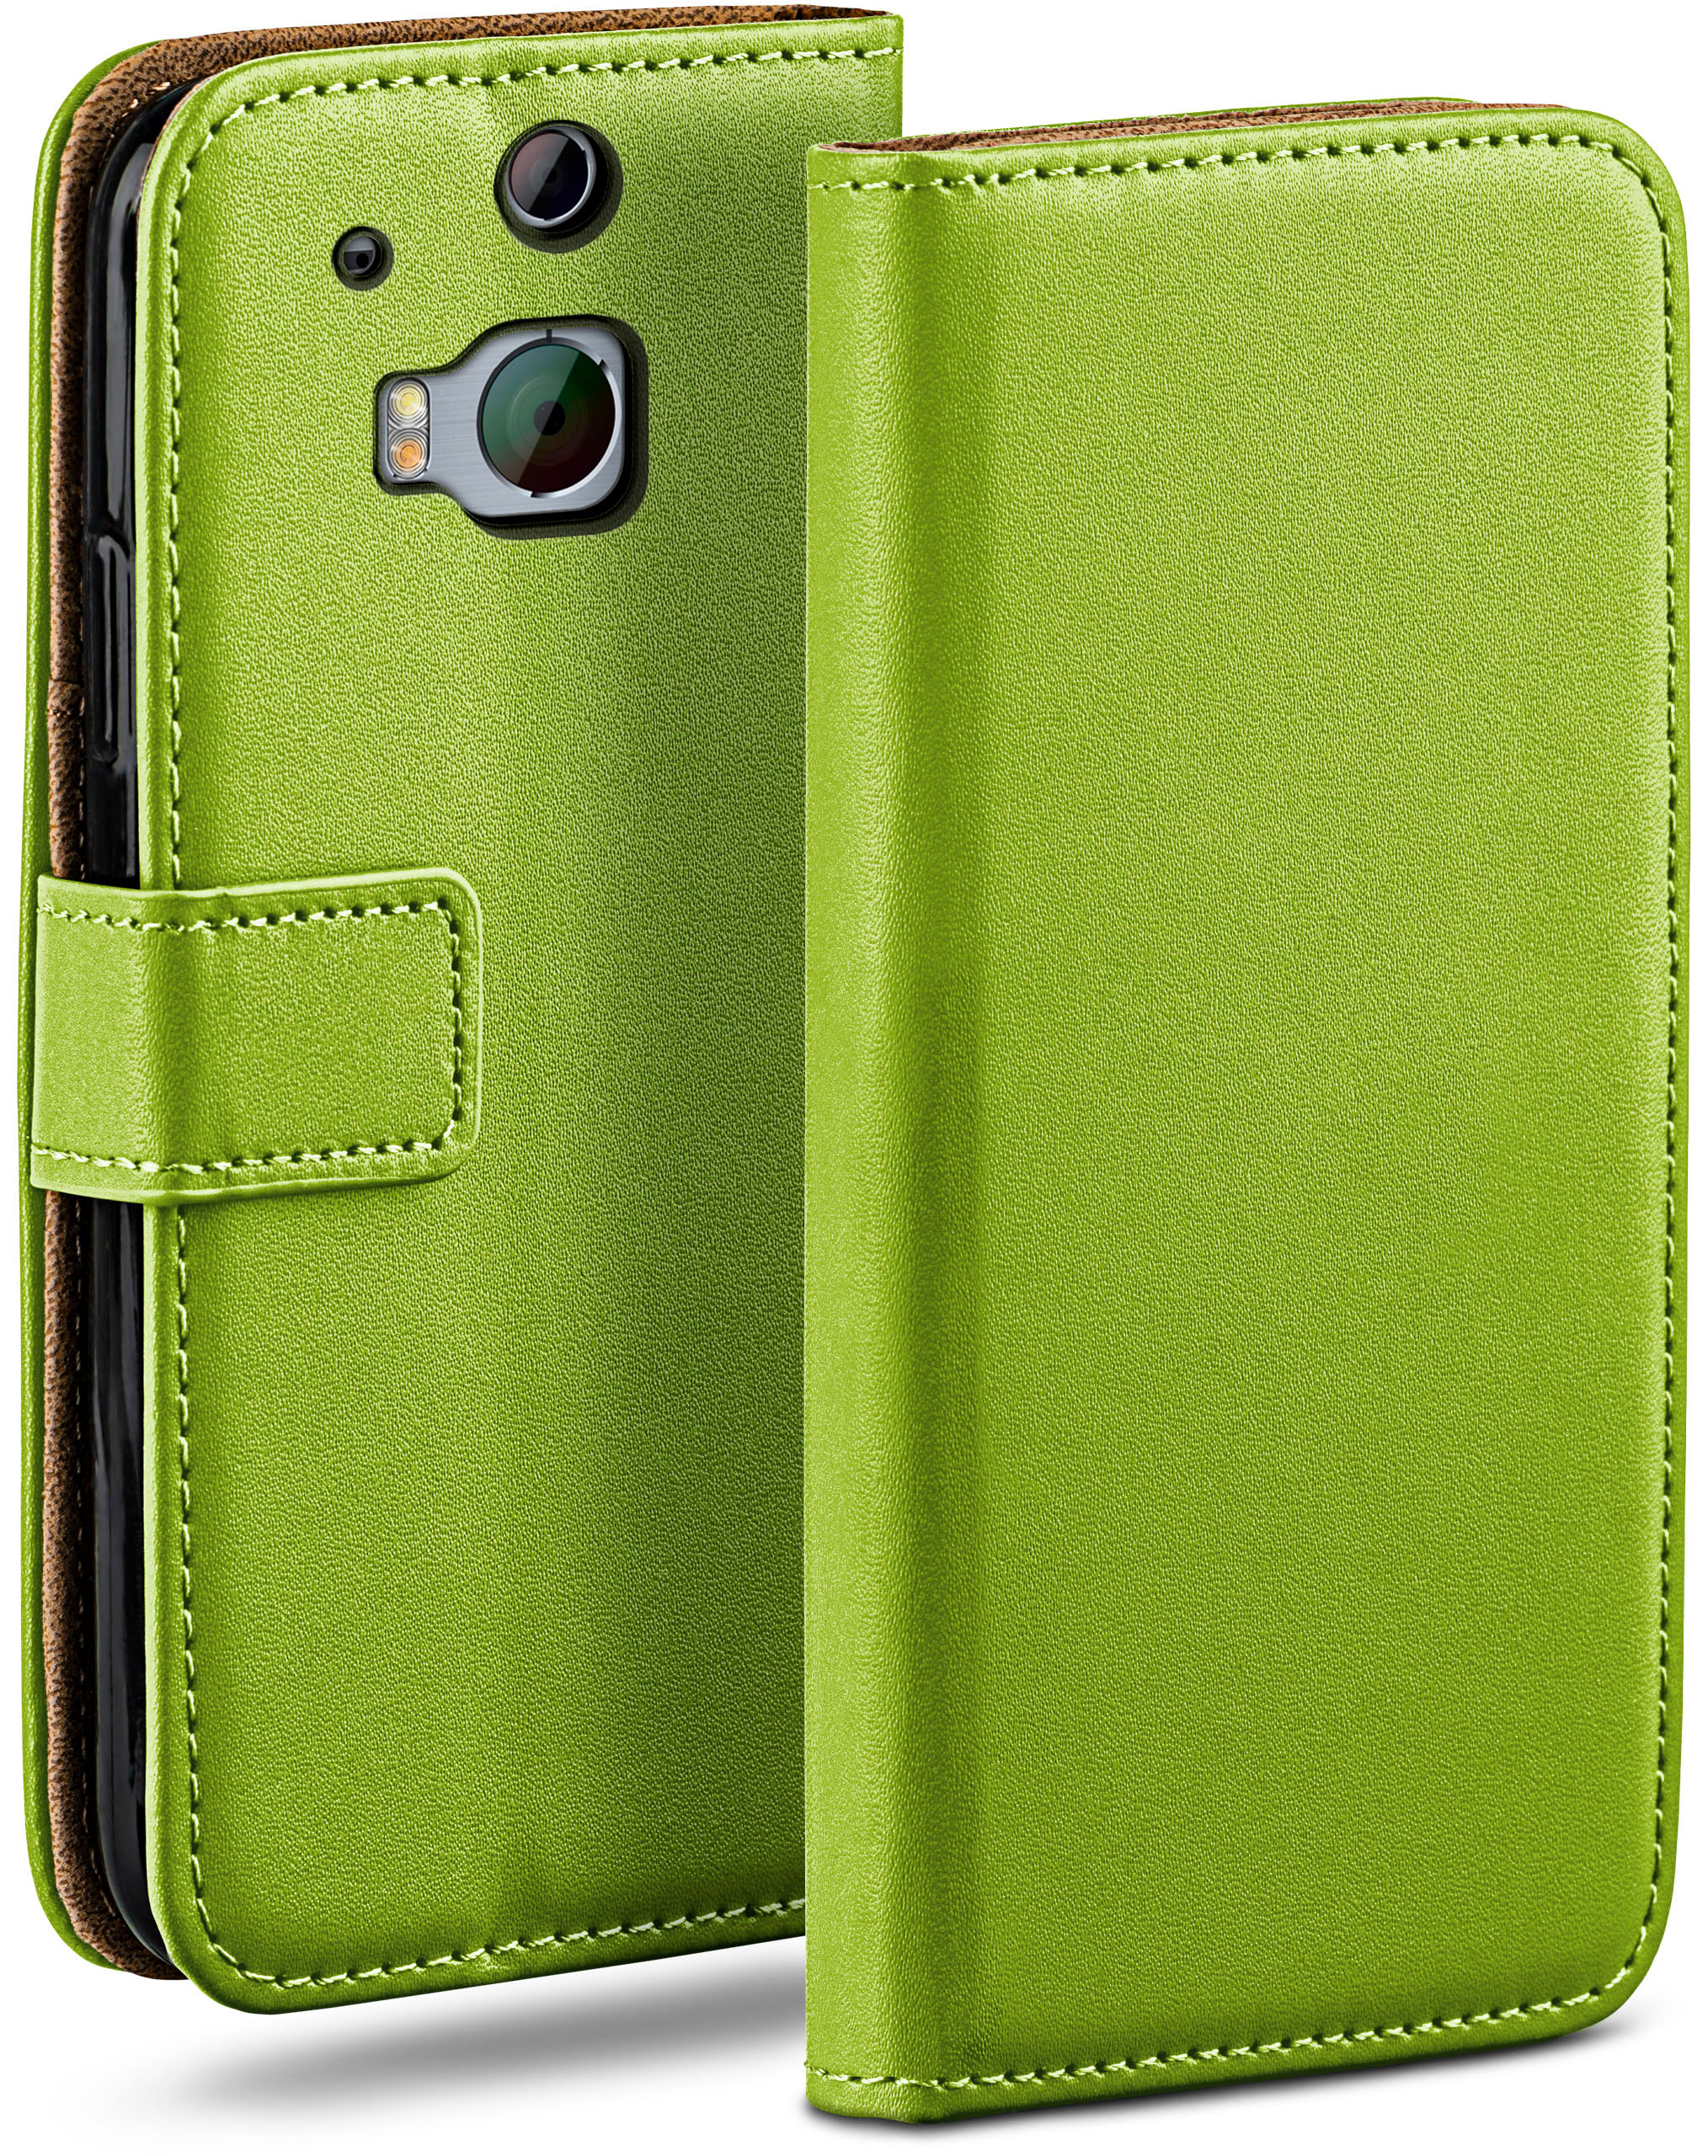 M8s, Bookcover, M8 HTC, Lime-Green One Case, Book MOEX /